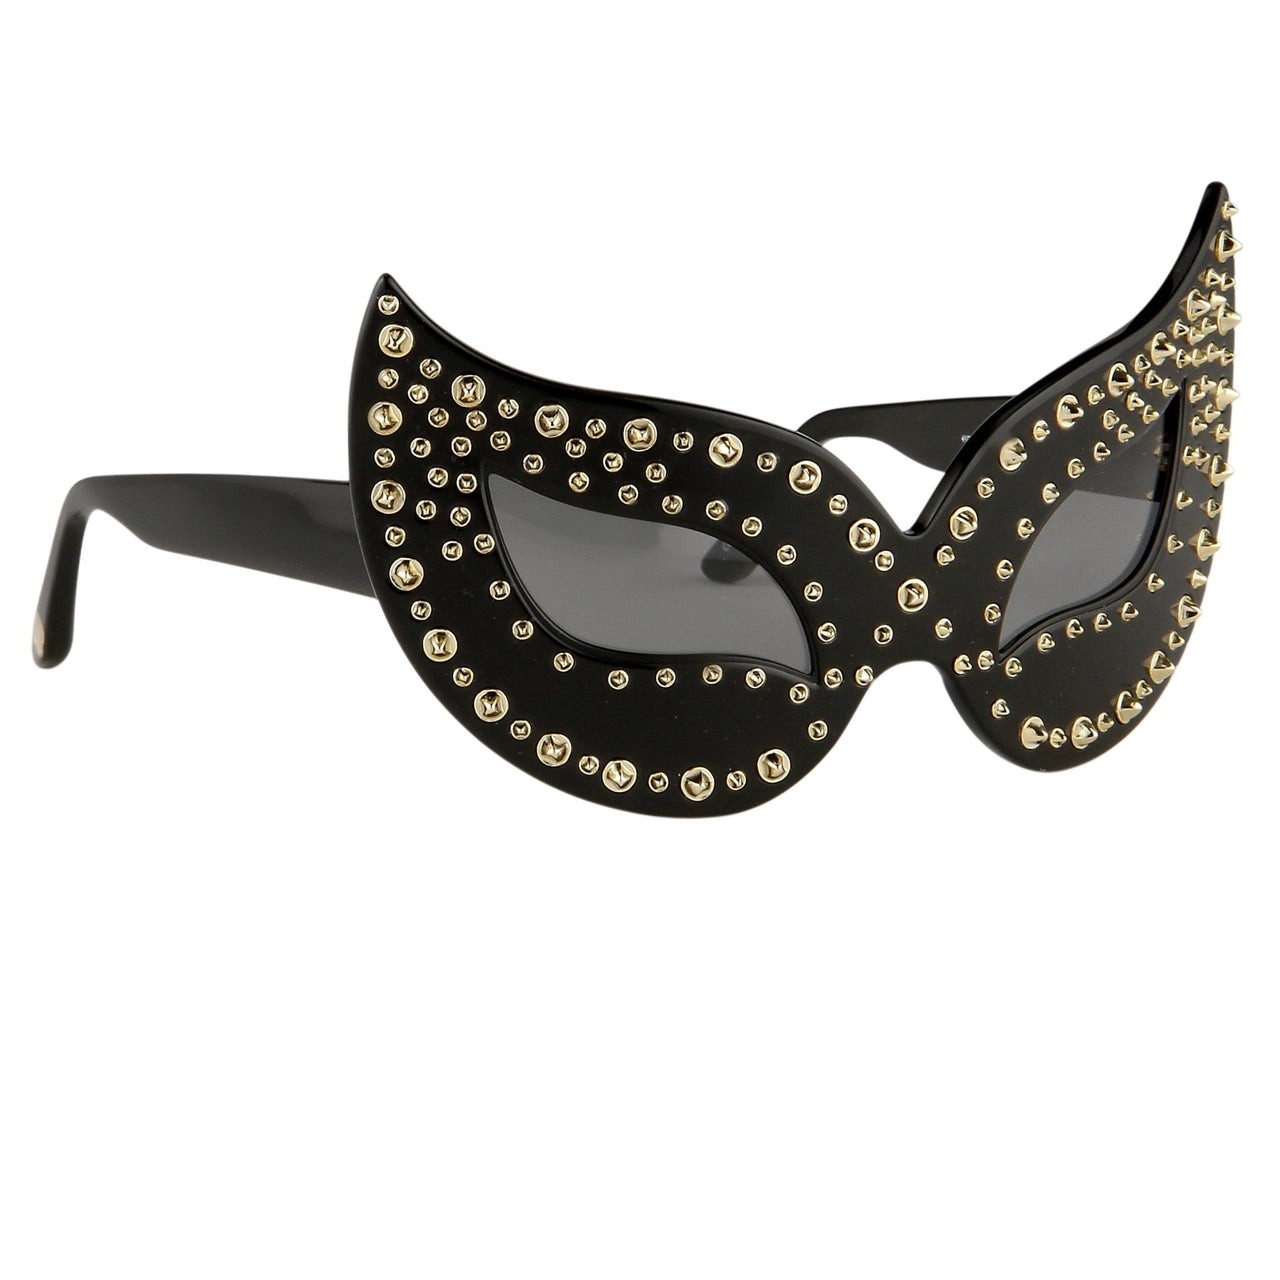 Agent Provocateur Sunglasses Special Frame Black and Grey Lenses Category 3 - AP51C8SUN - Watches & Crystals